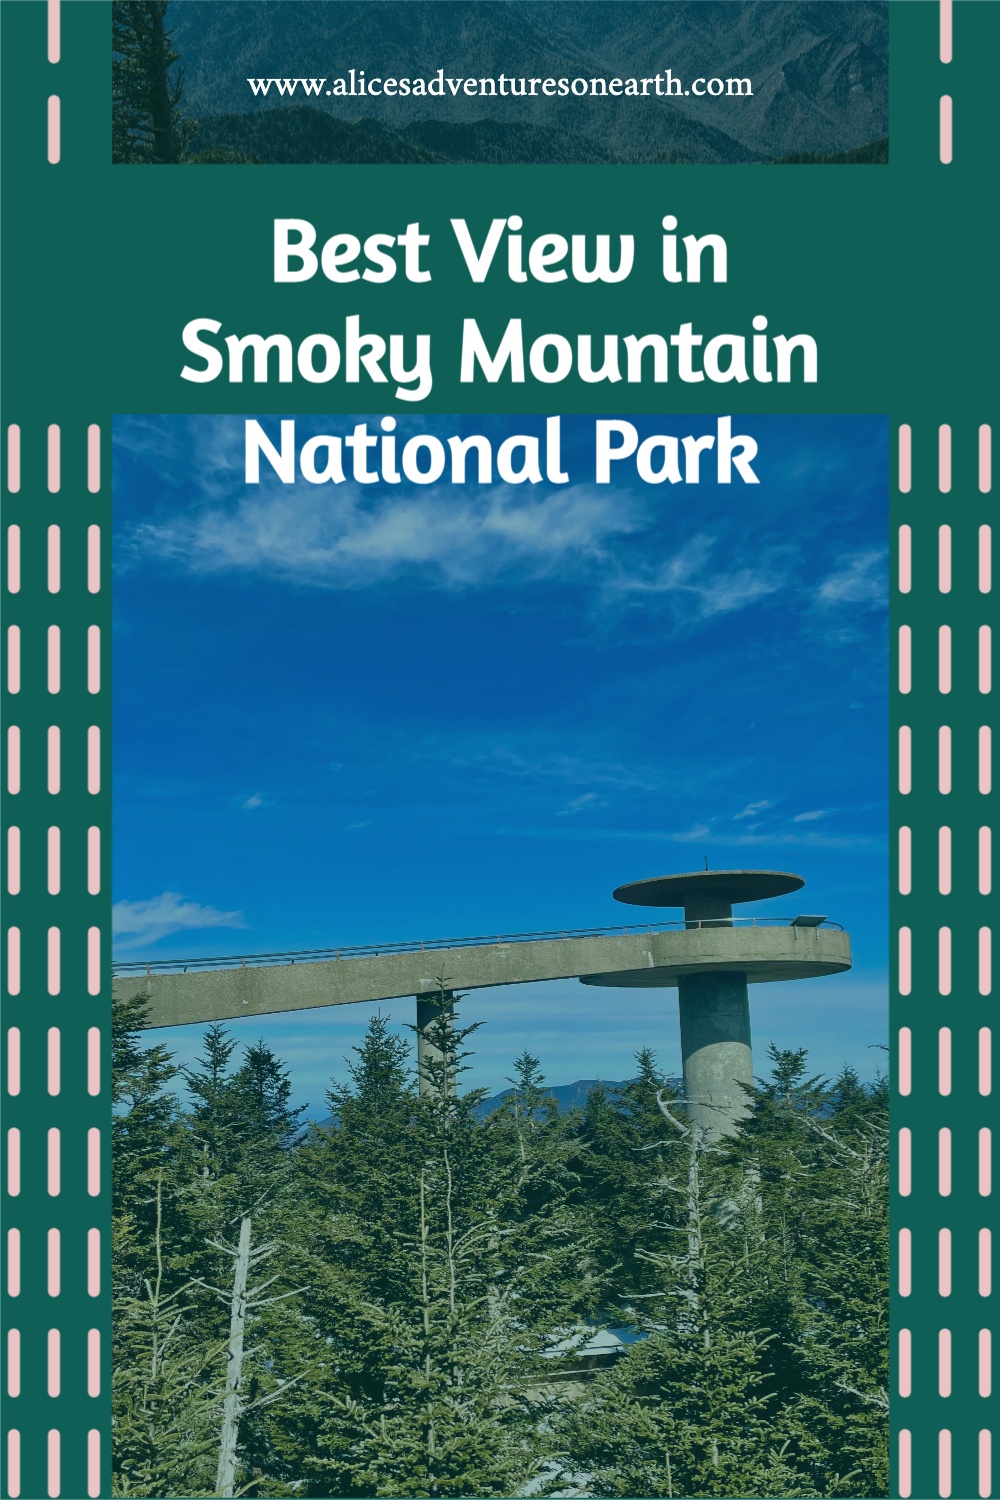 CLingmans Dome best view in the smoky mountains national park. #travel #smokymountains #hiking 